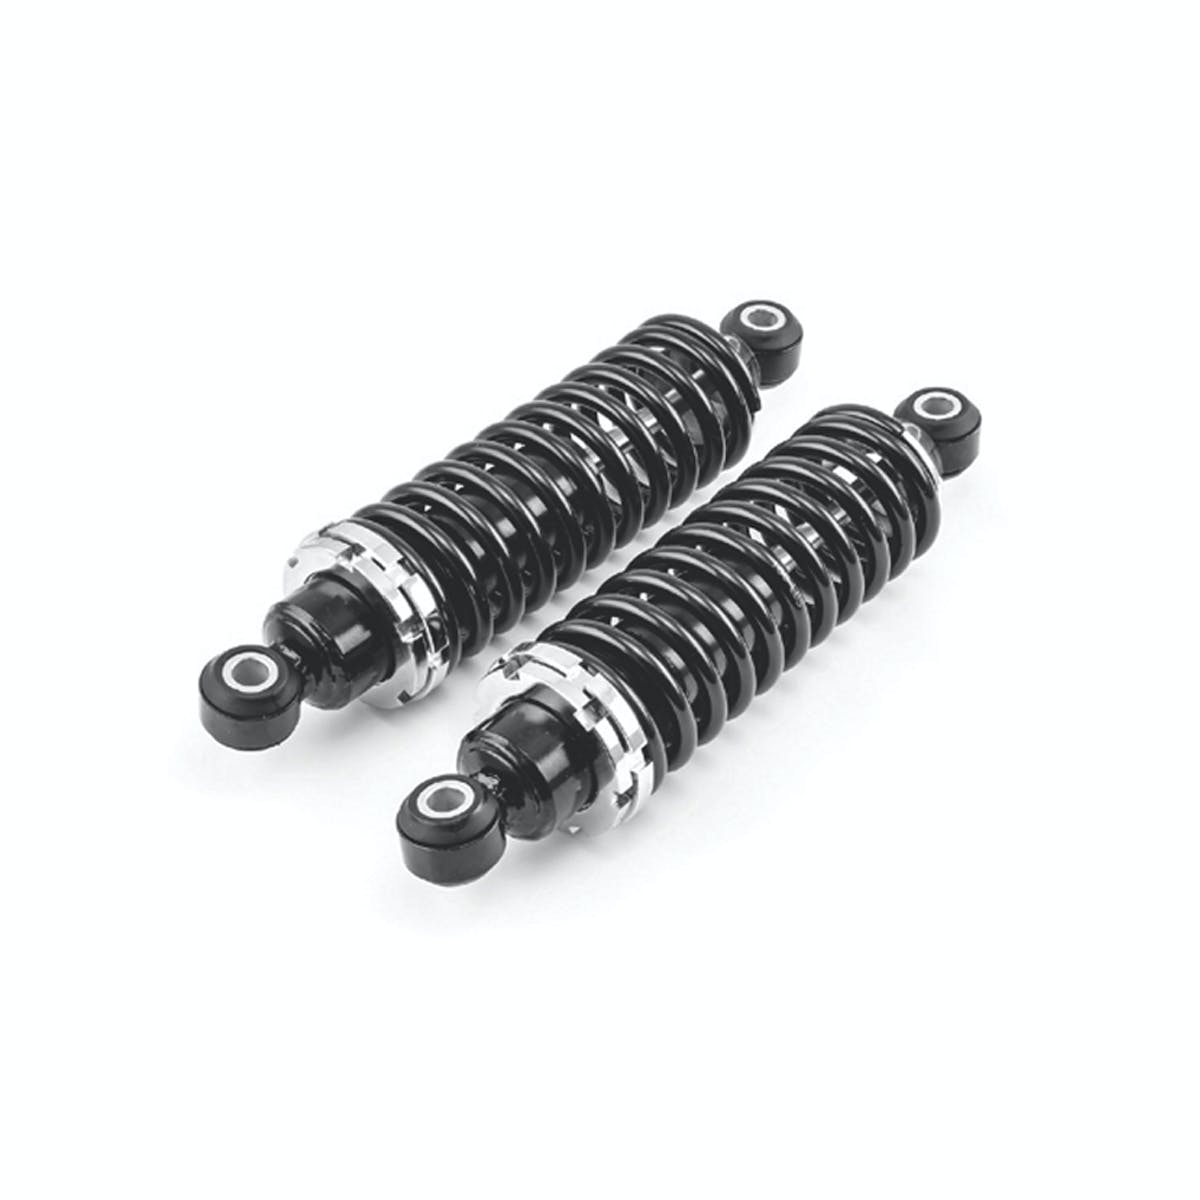 Speedmaster PCE494.1001 150 lbs/in Spring Rate 12 Coil Over Shock Assemblies Adjustable (Pair)